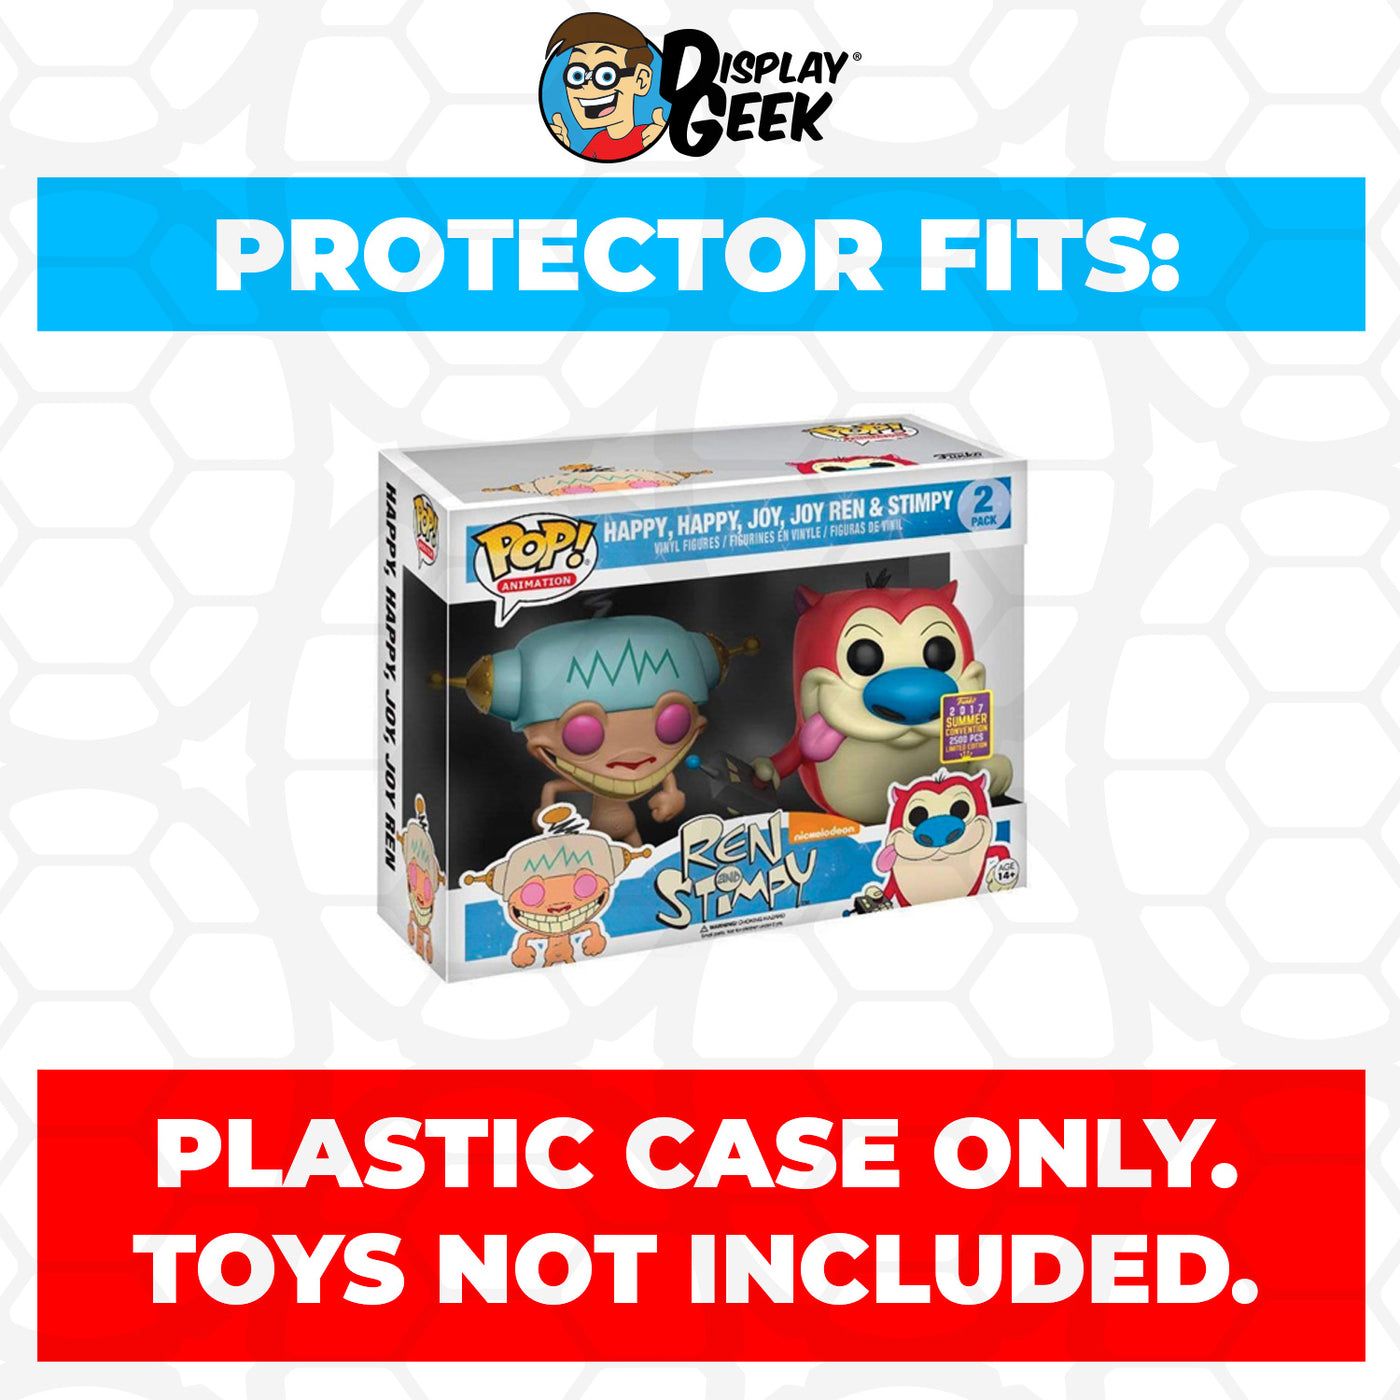 Pop Protector for 2 Pack Happy, Happy, Joy, Joy Ren & Stimpy SDCC Funko Pop on The Protector Guide App by Display Geek